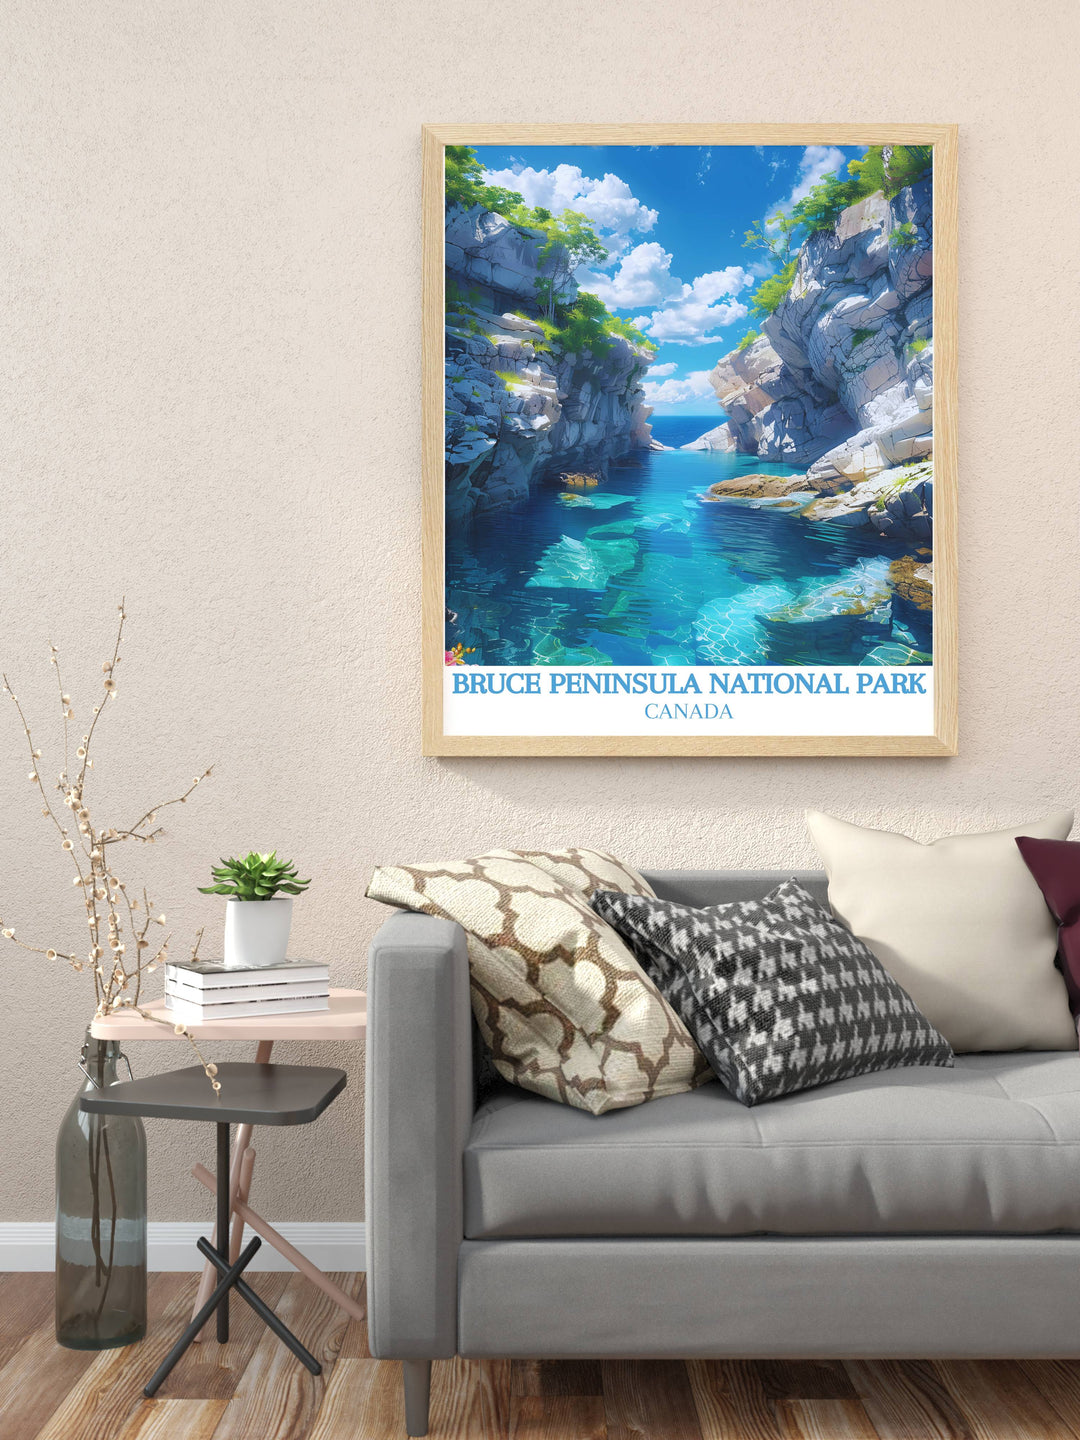 The Grotto Landscape Print brings the enchanting scenery of this iconic location to life perfect for enhancing your living space with a touch of natural beauty and inspiring a sense of adventure